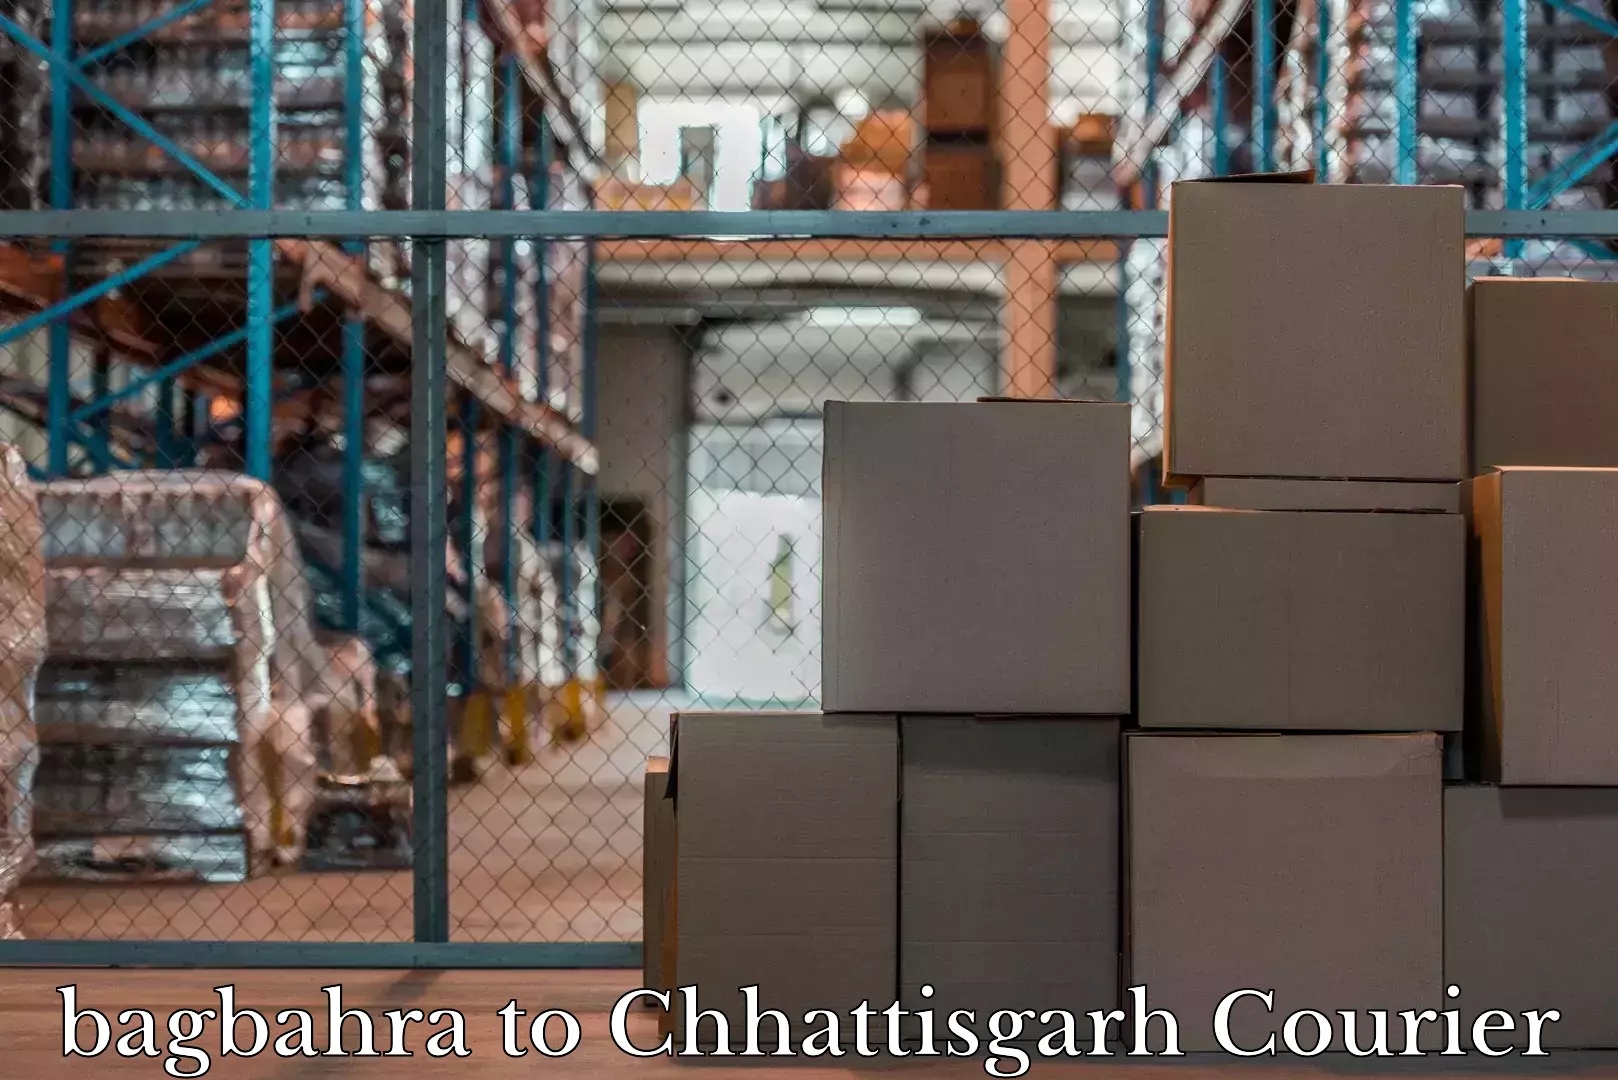 Direct baggage courier bagbahra to Chhattisgarh